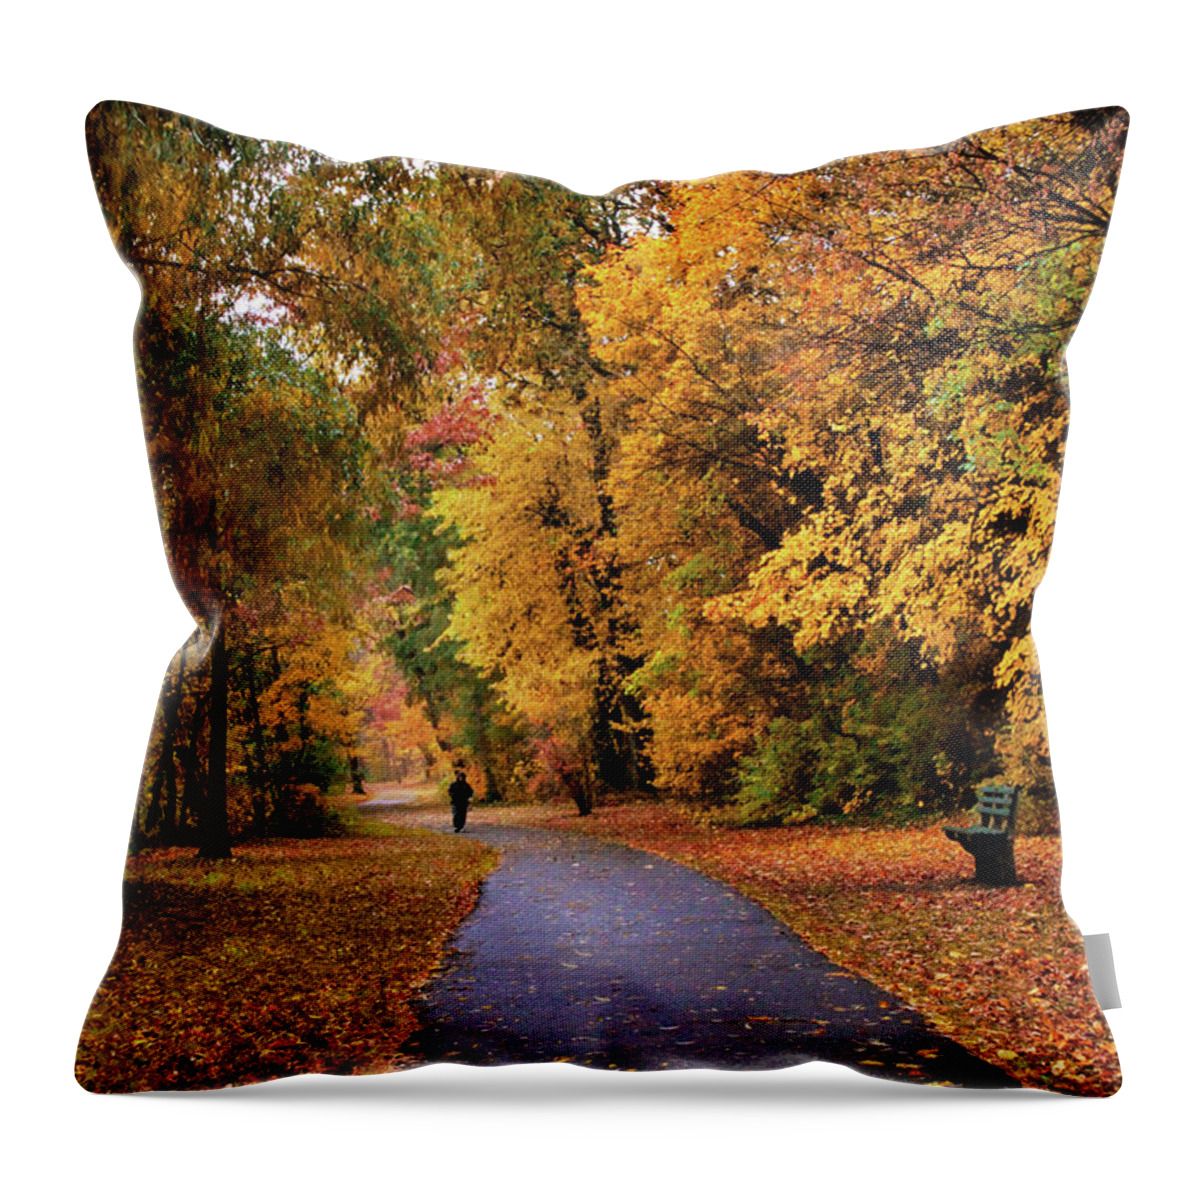 Autumn Throw Pillow featuring the photograph October Promenade by Jessica Jenney